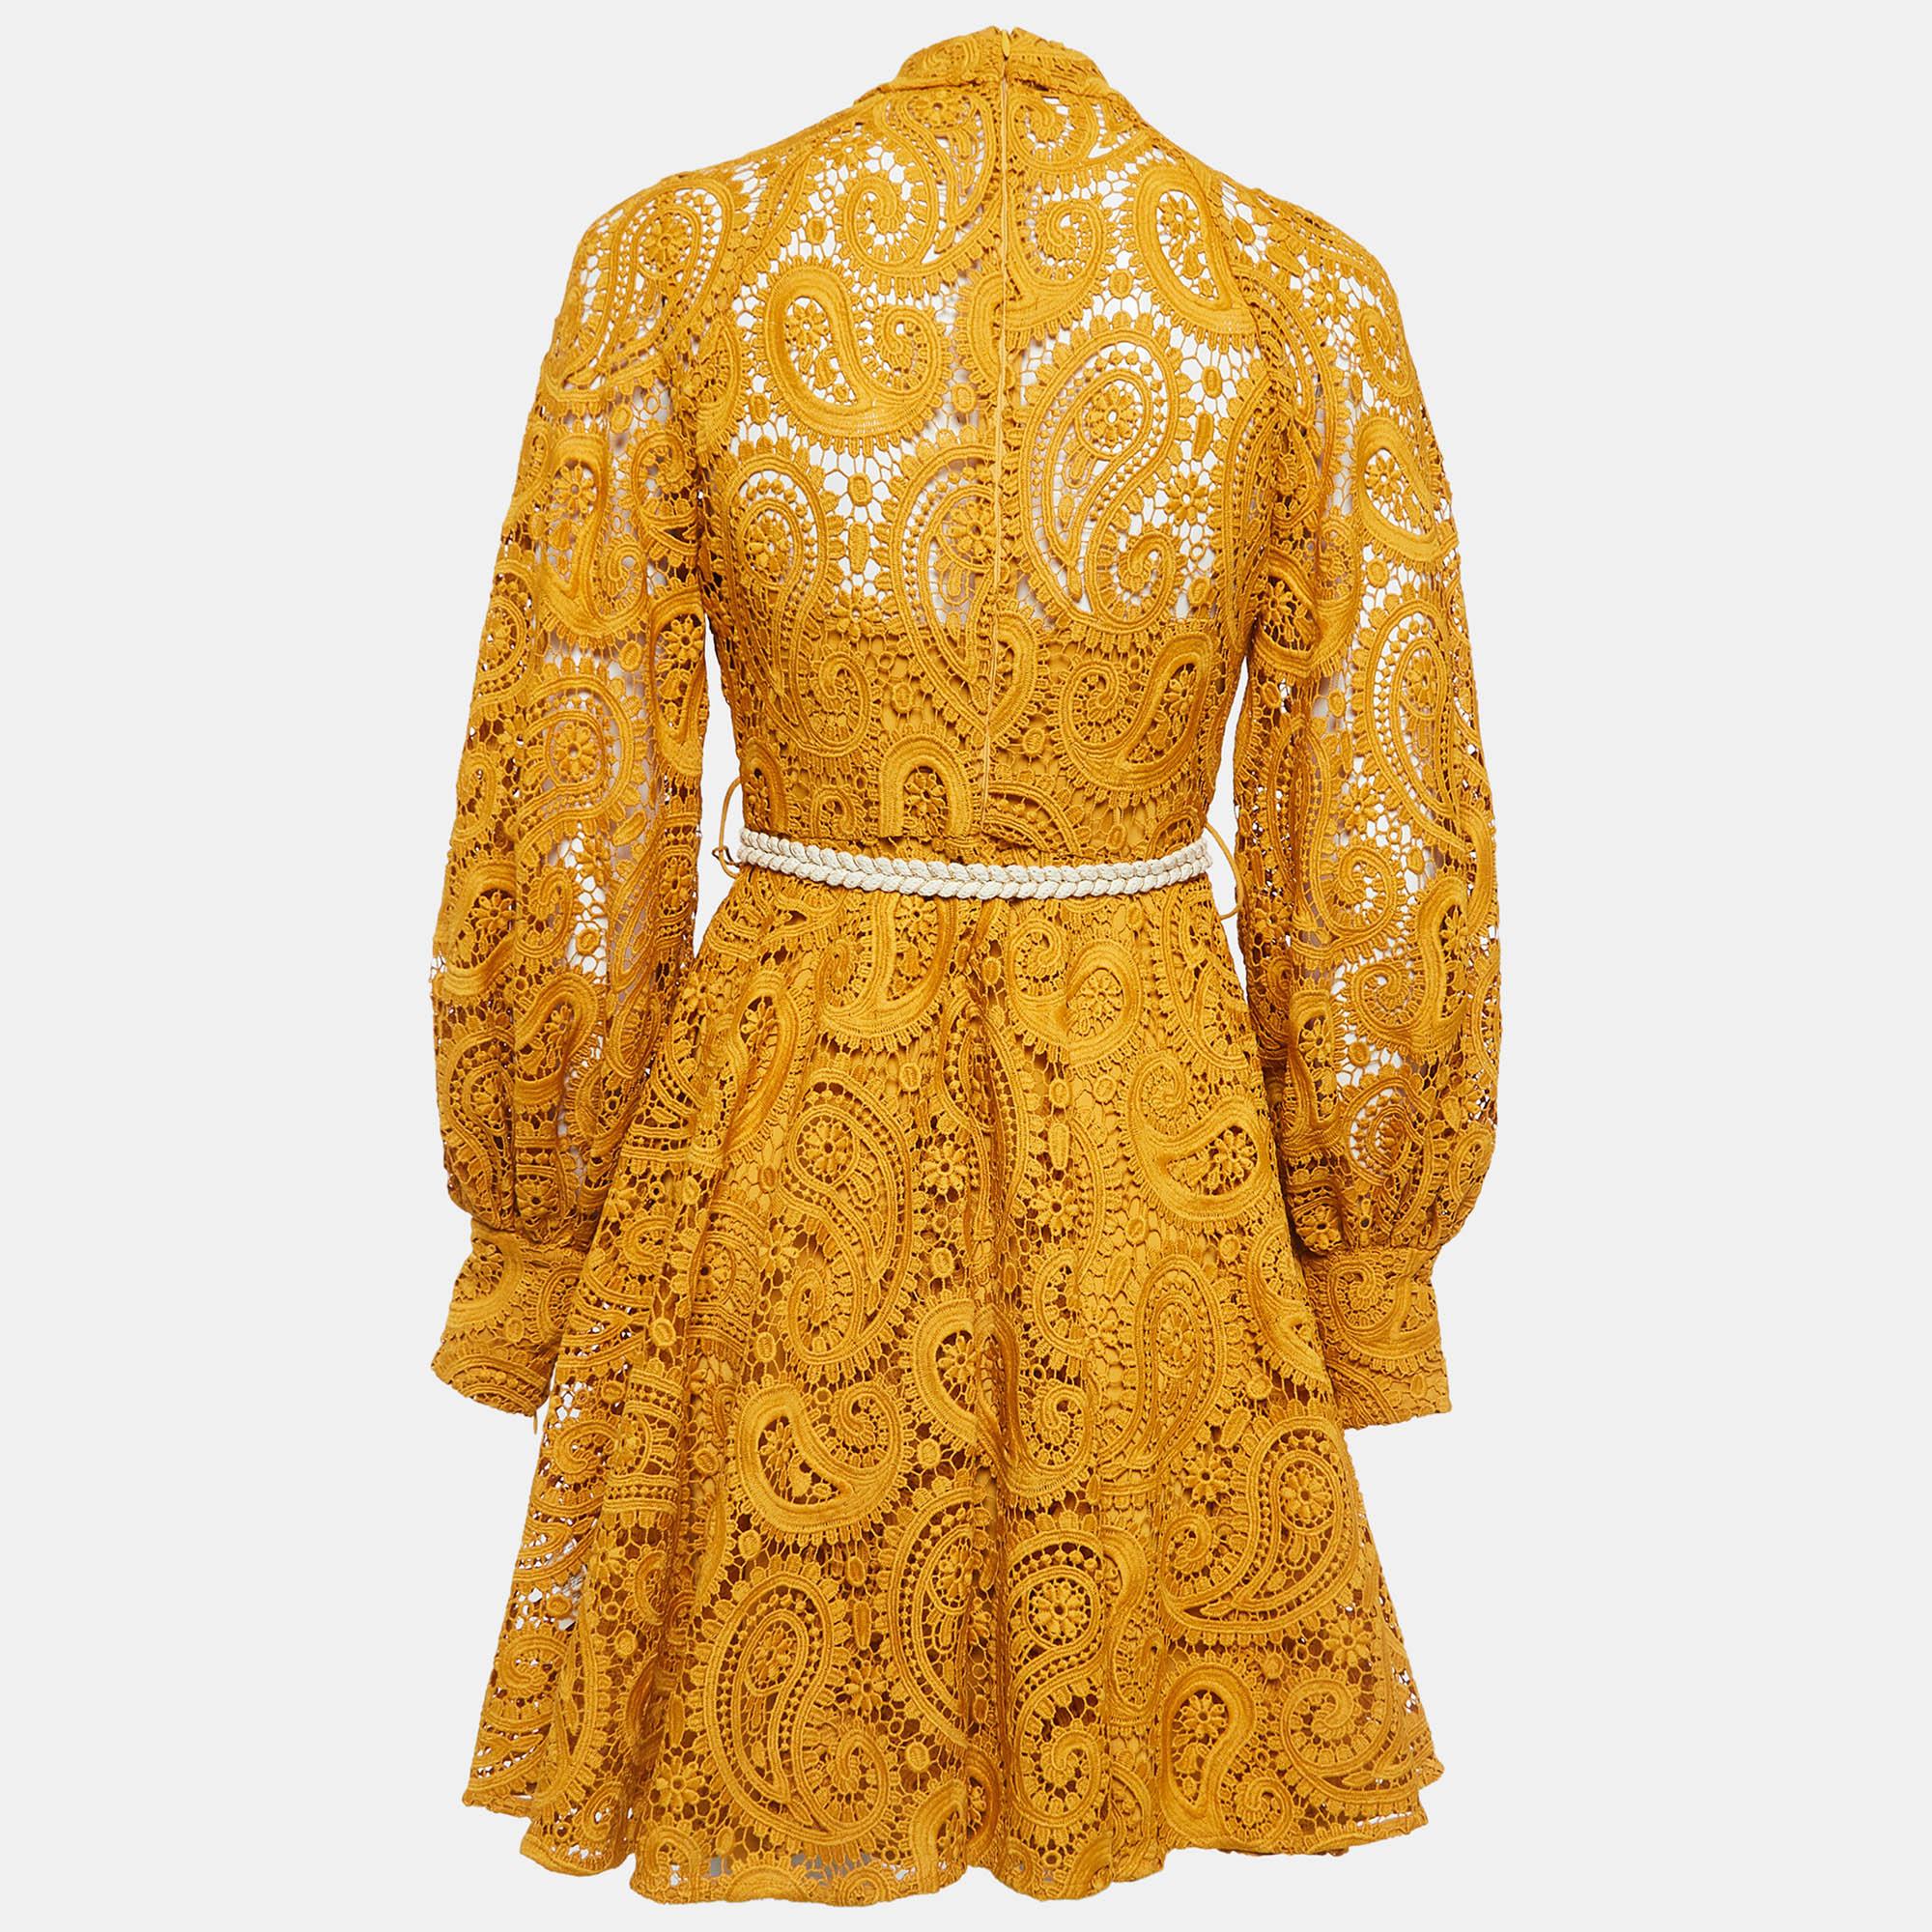 Drape yourself in the exquisite charm of the Zimmermann dress. Delicately crafted with intricate paisley lace, this dress boasts a playful yet elegant vibe. The sunny yellow hue radiates warmth, while the mini length adds a flirtatious touch.